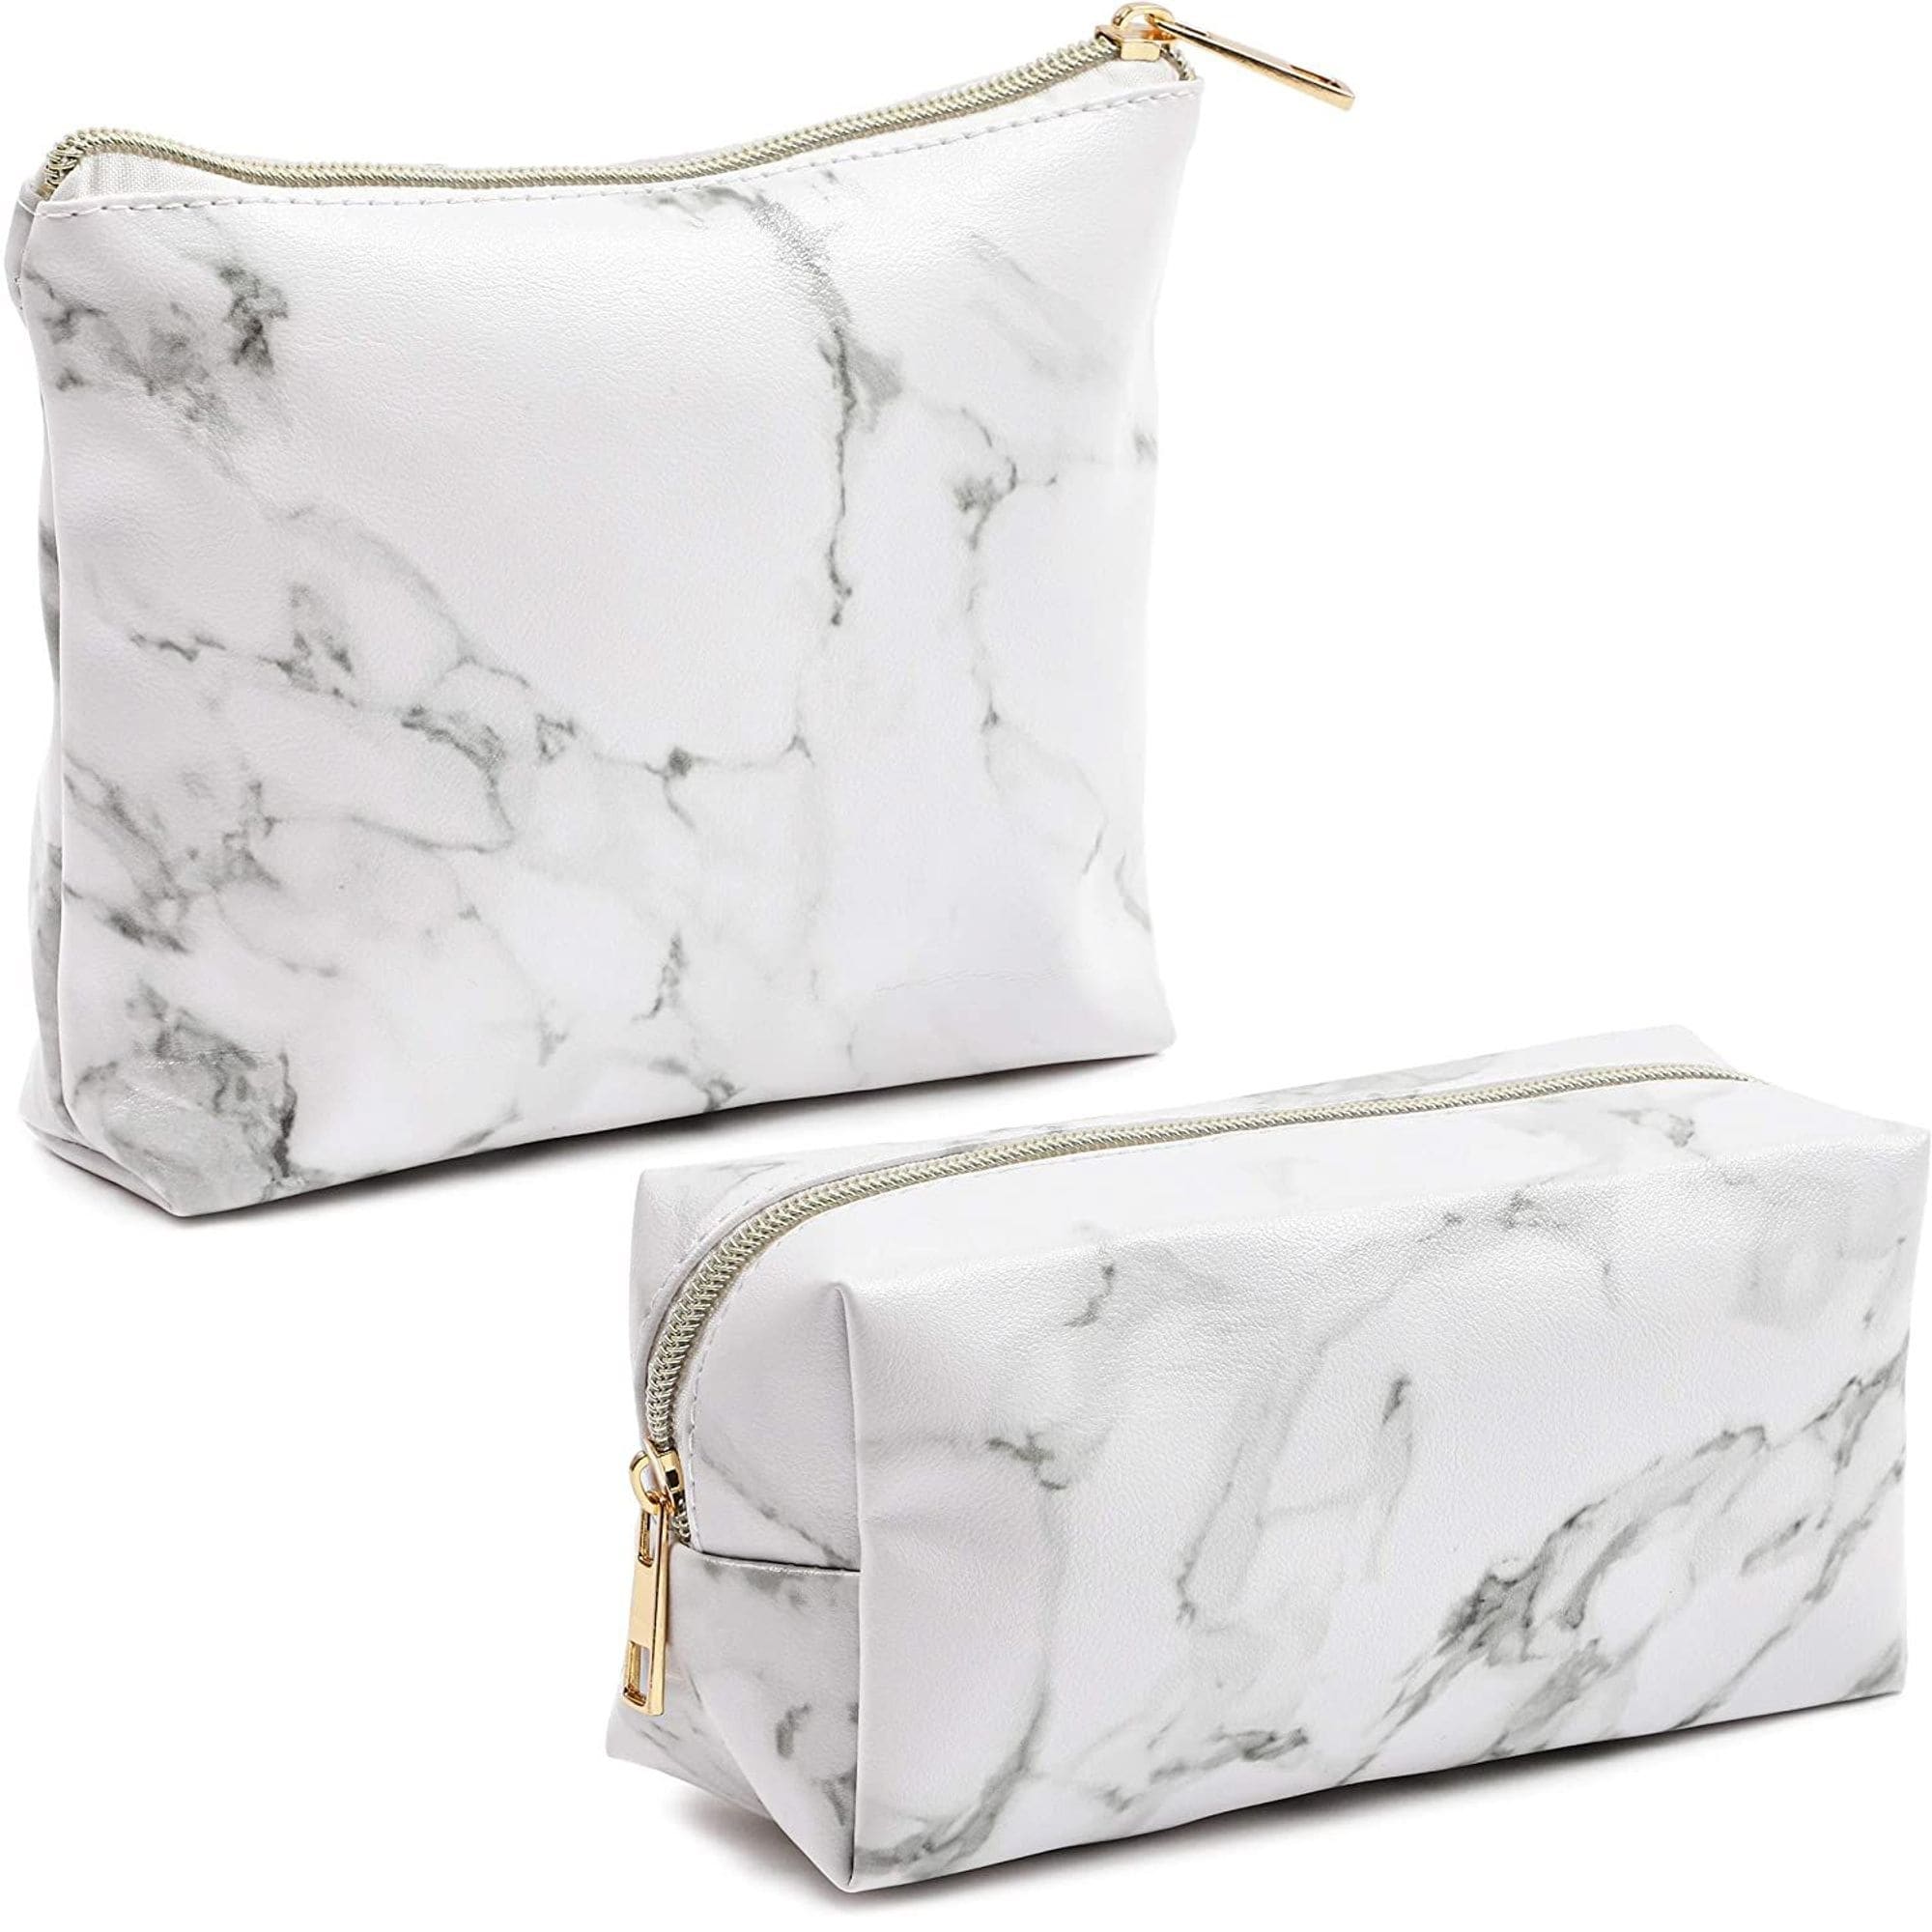 White Marble Printed Cosmetic Travel Pouch Set for...